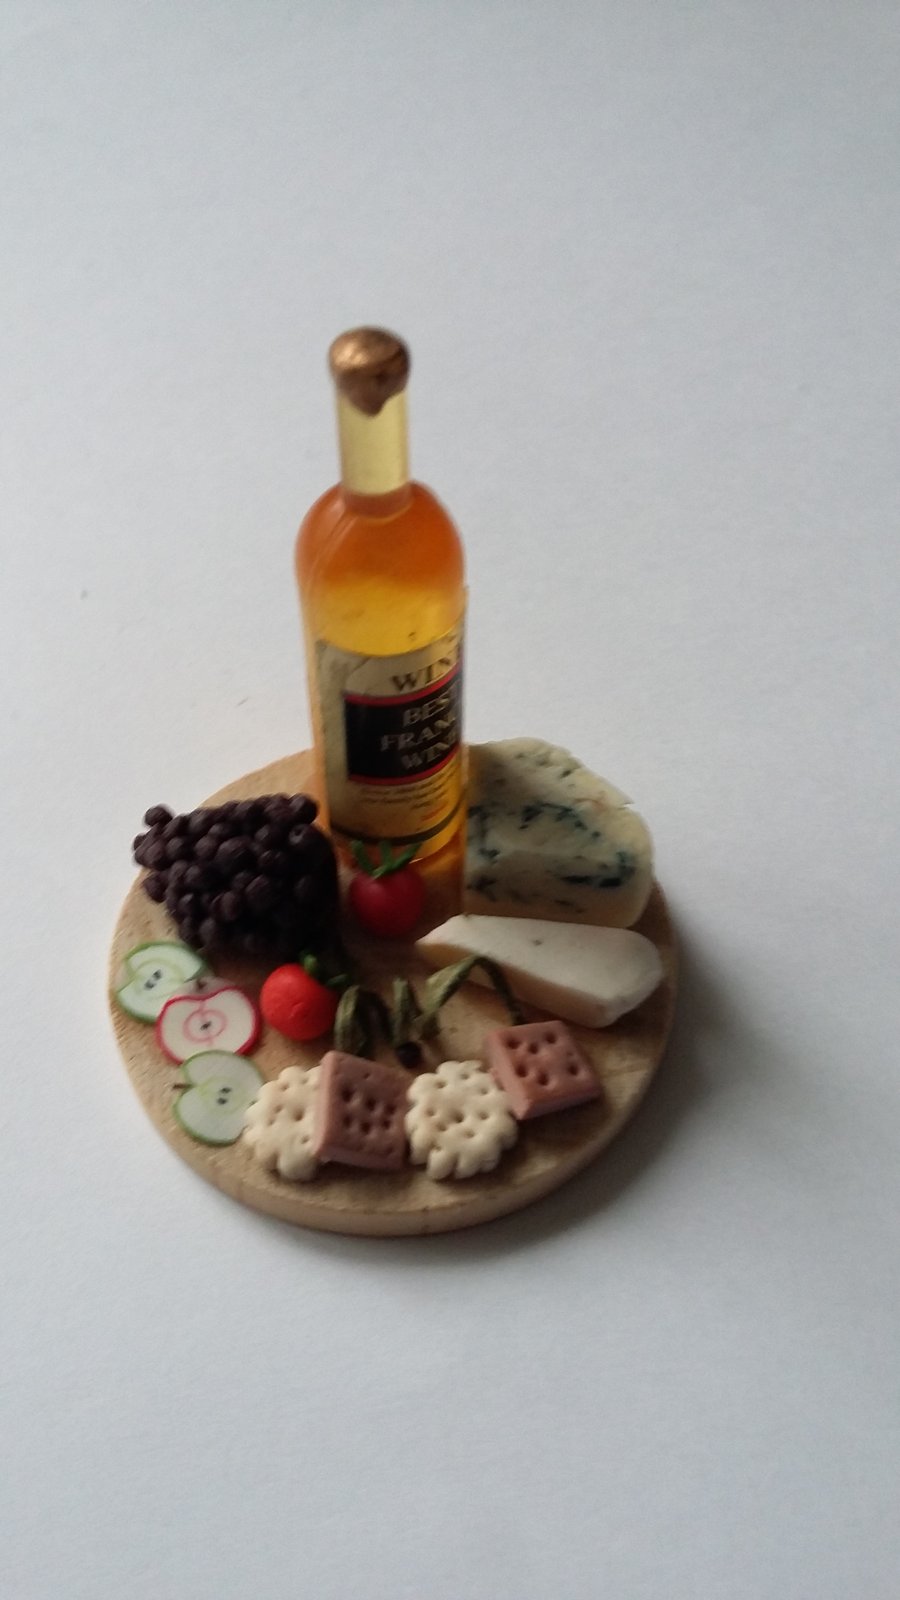 1,12TH SCALE CHEESE AND WINE PLATTER